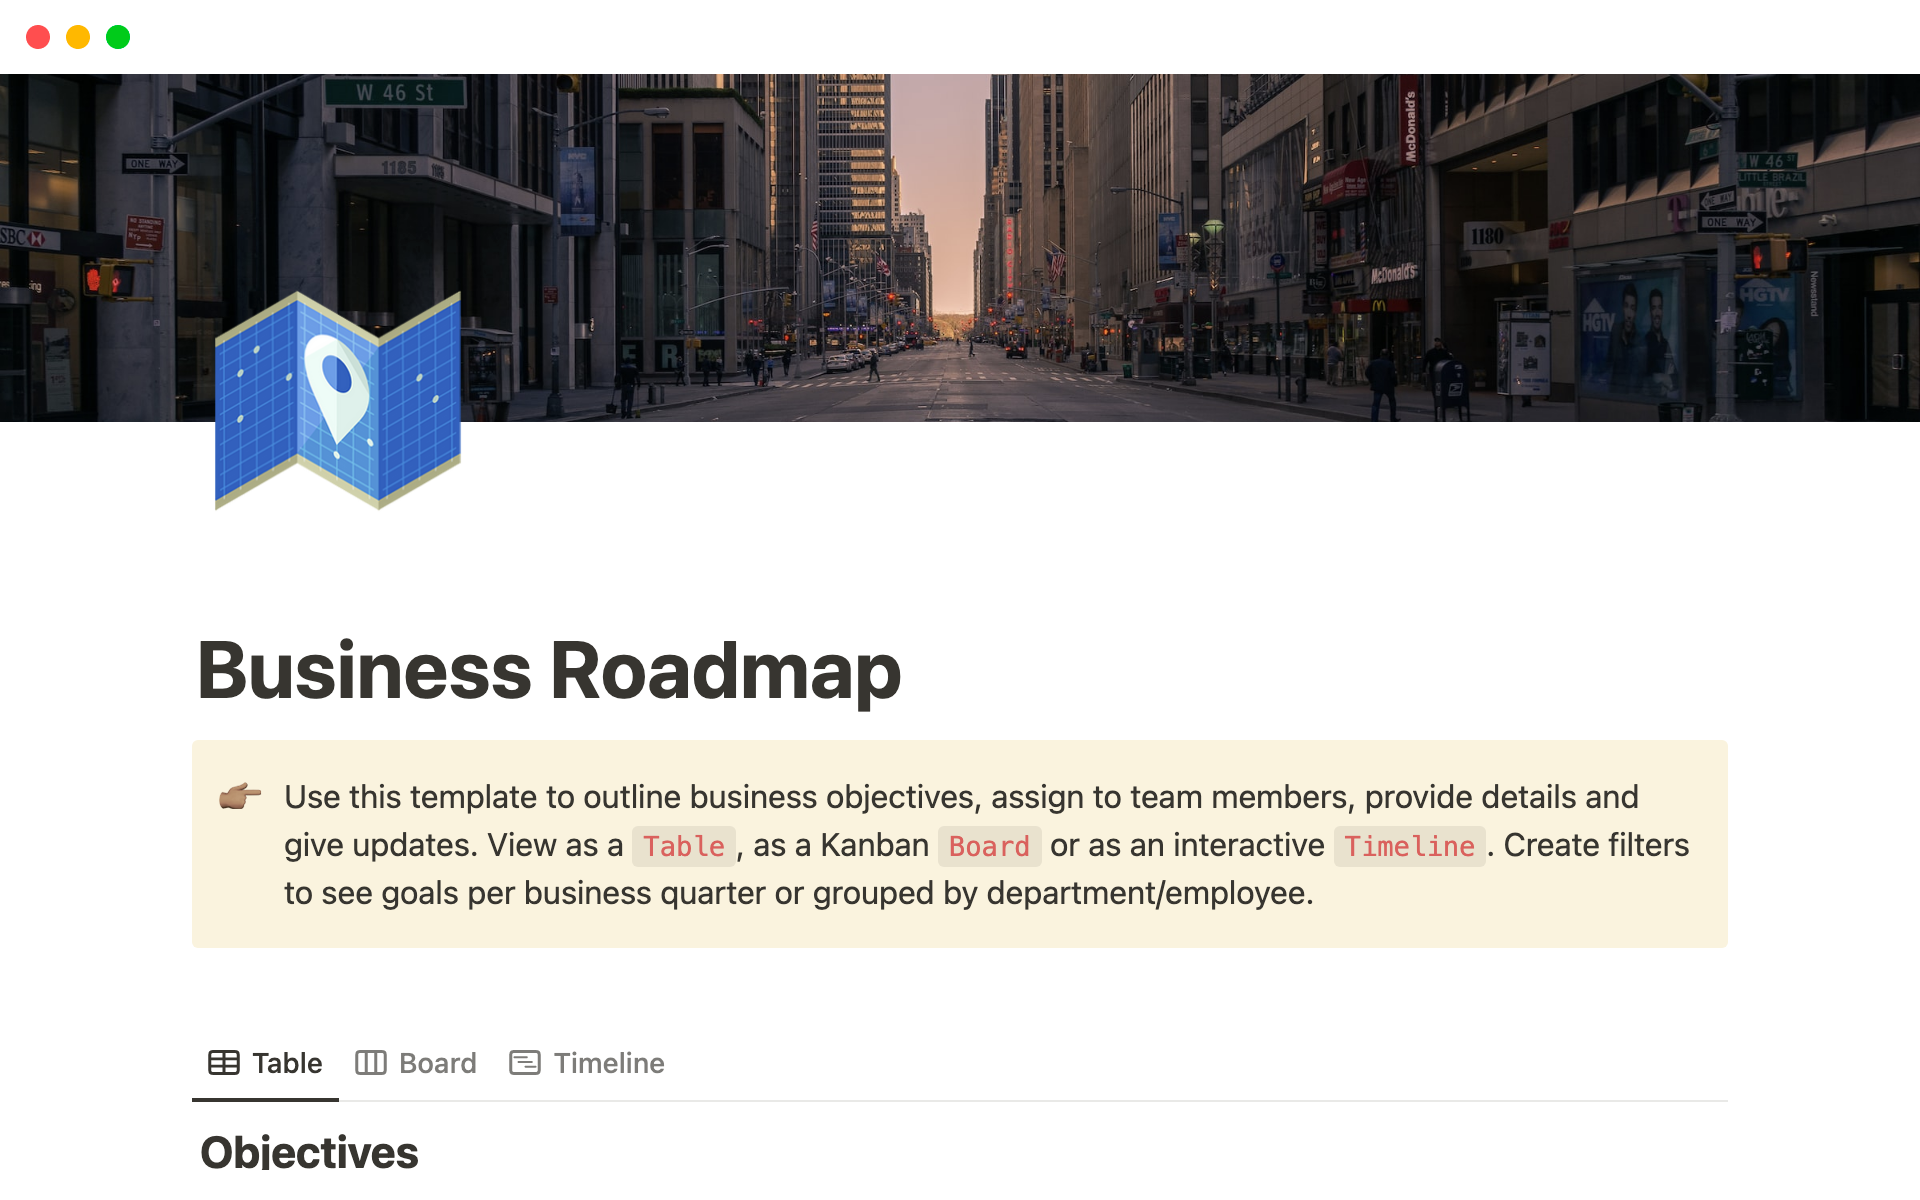 Use this template to create a roadmap for your business planning.